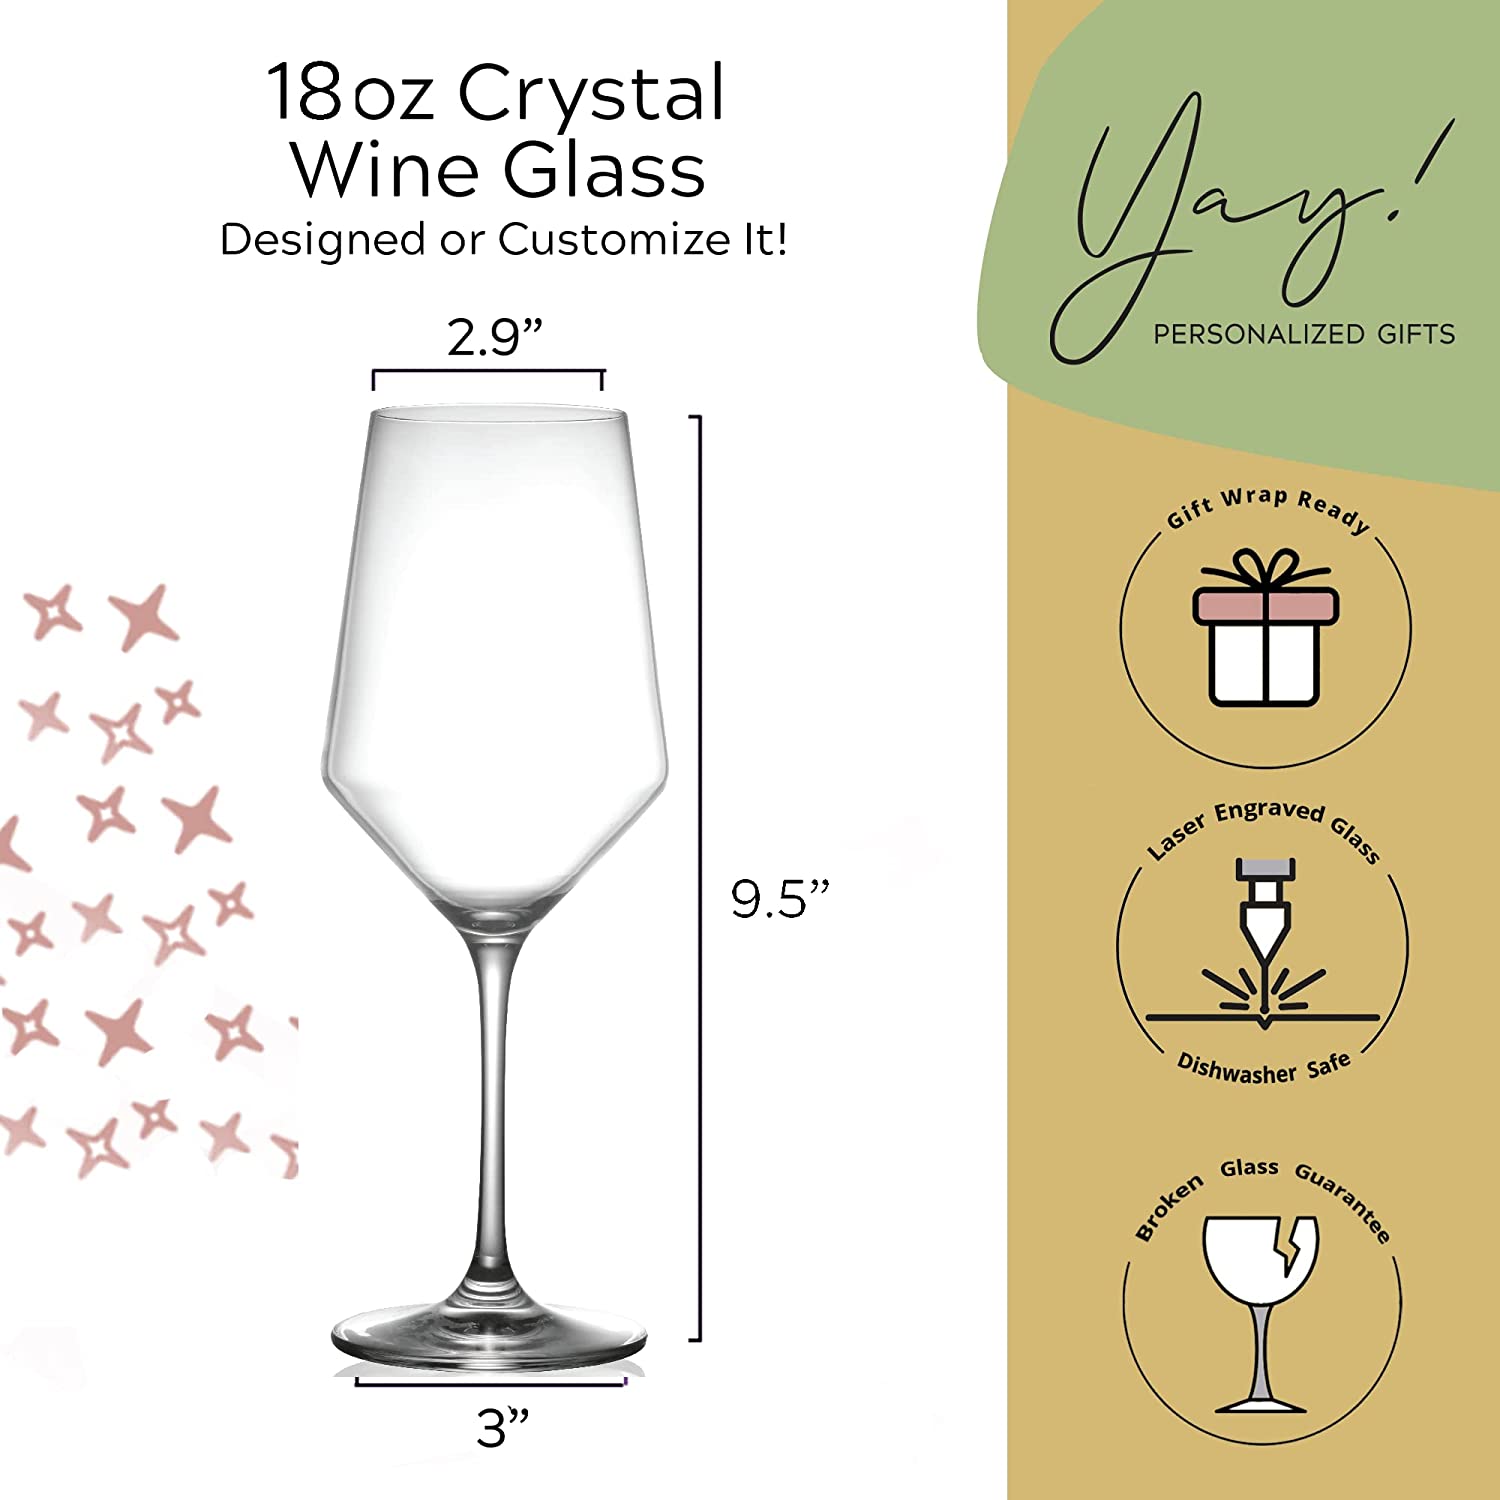 Crystal Wine Glasses (16 Count Case Pack)